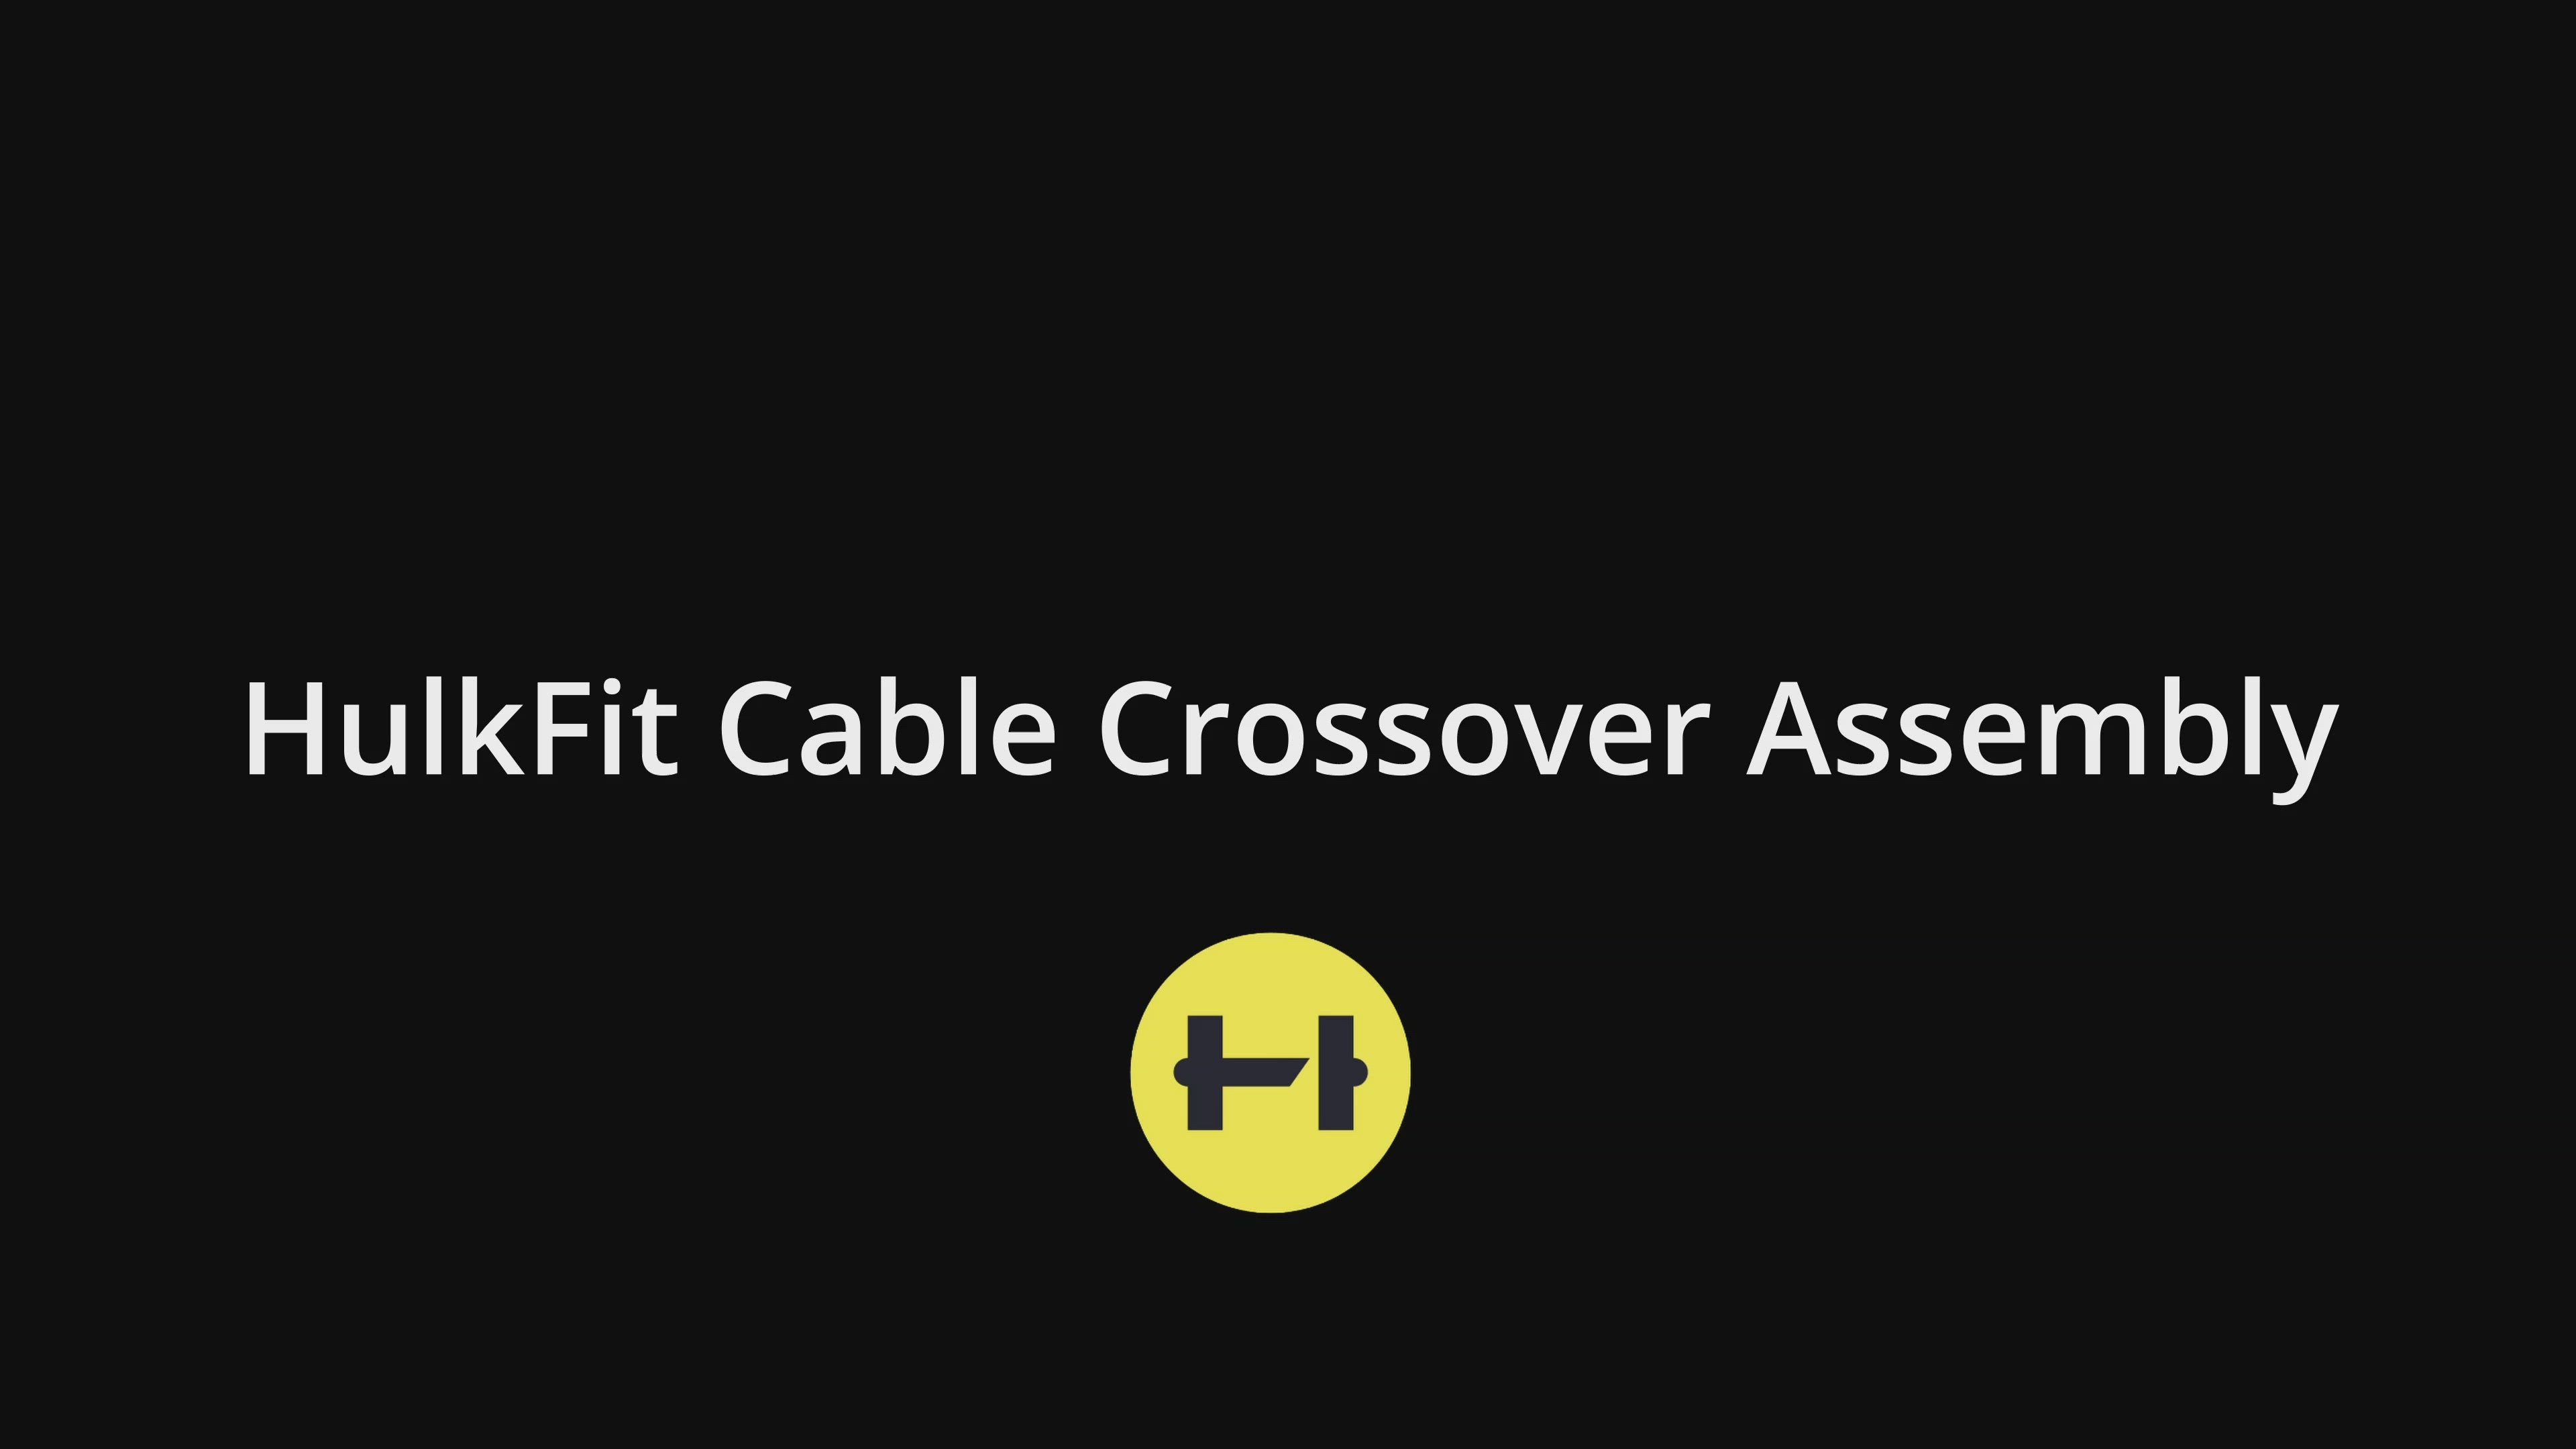 Gym; Home Gym; Garage Gym; Sports; Workout; Exercise; Exercise Equipment; Fitness; Attachments; Power Cage; Power Rack; Cable Machine; Cable Attachments; Cable Crossover Attachment